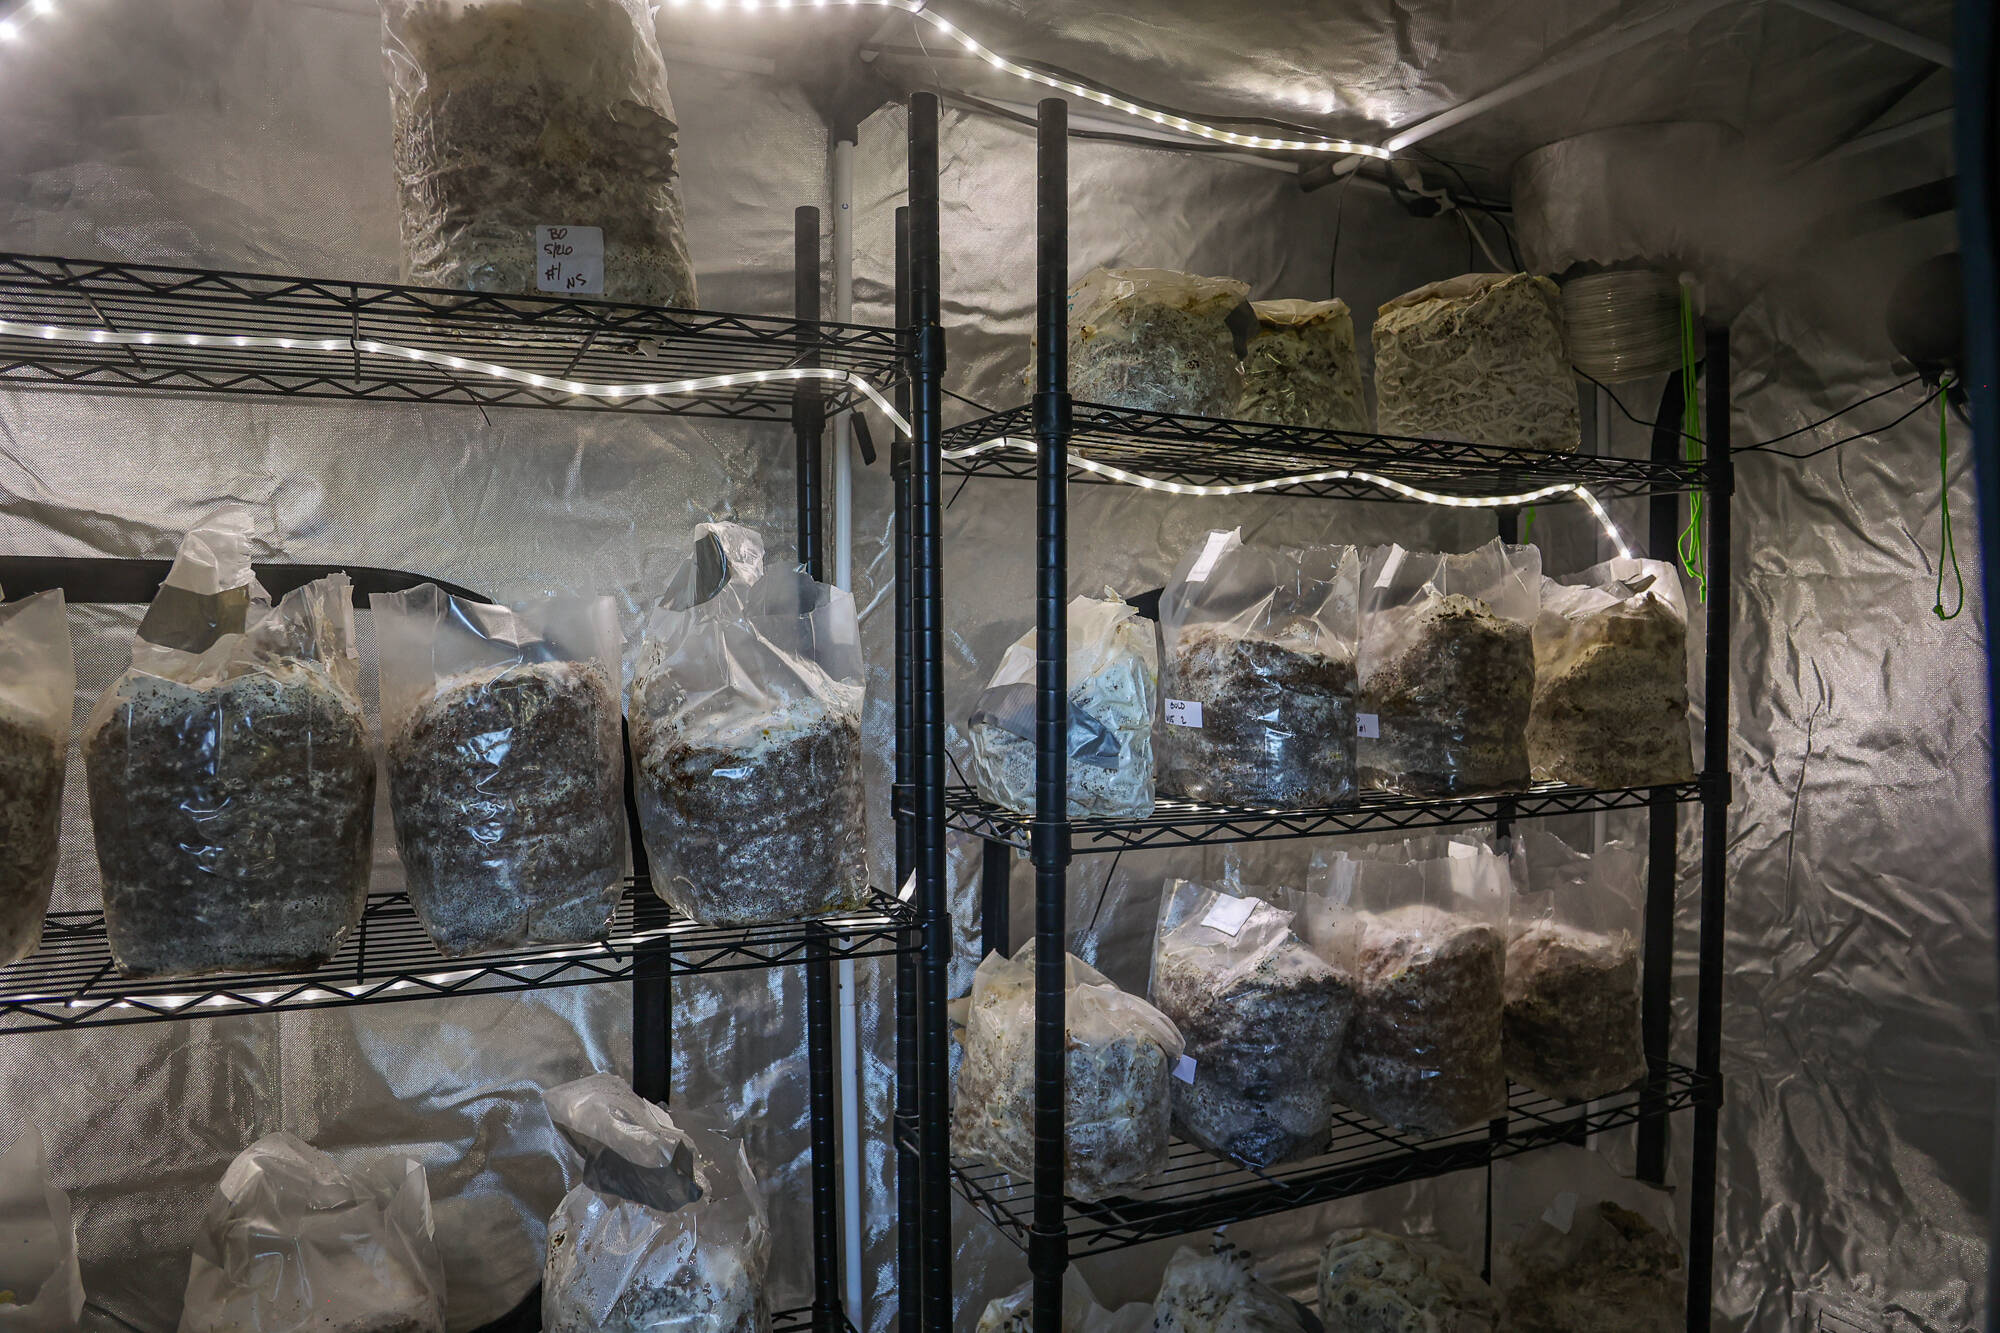 Shelves of mushrooms inside a grow tent at Willow Ranch, June 25. (Photo by Caitlyn Anderson)